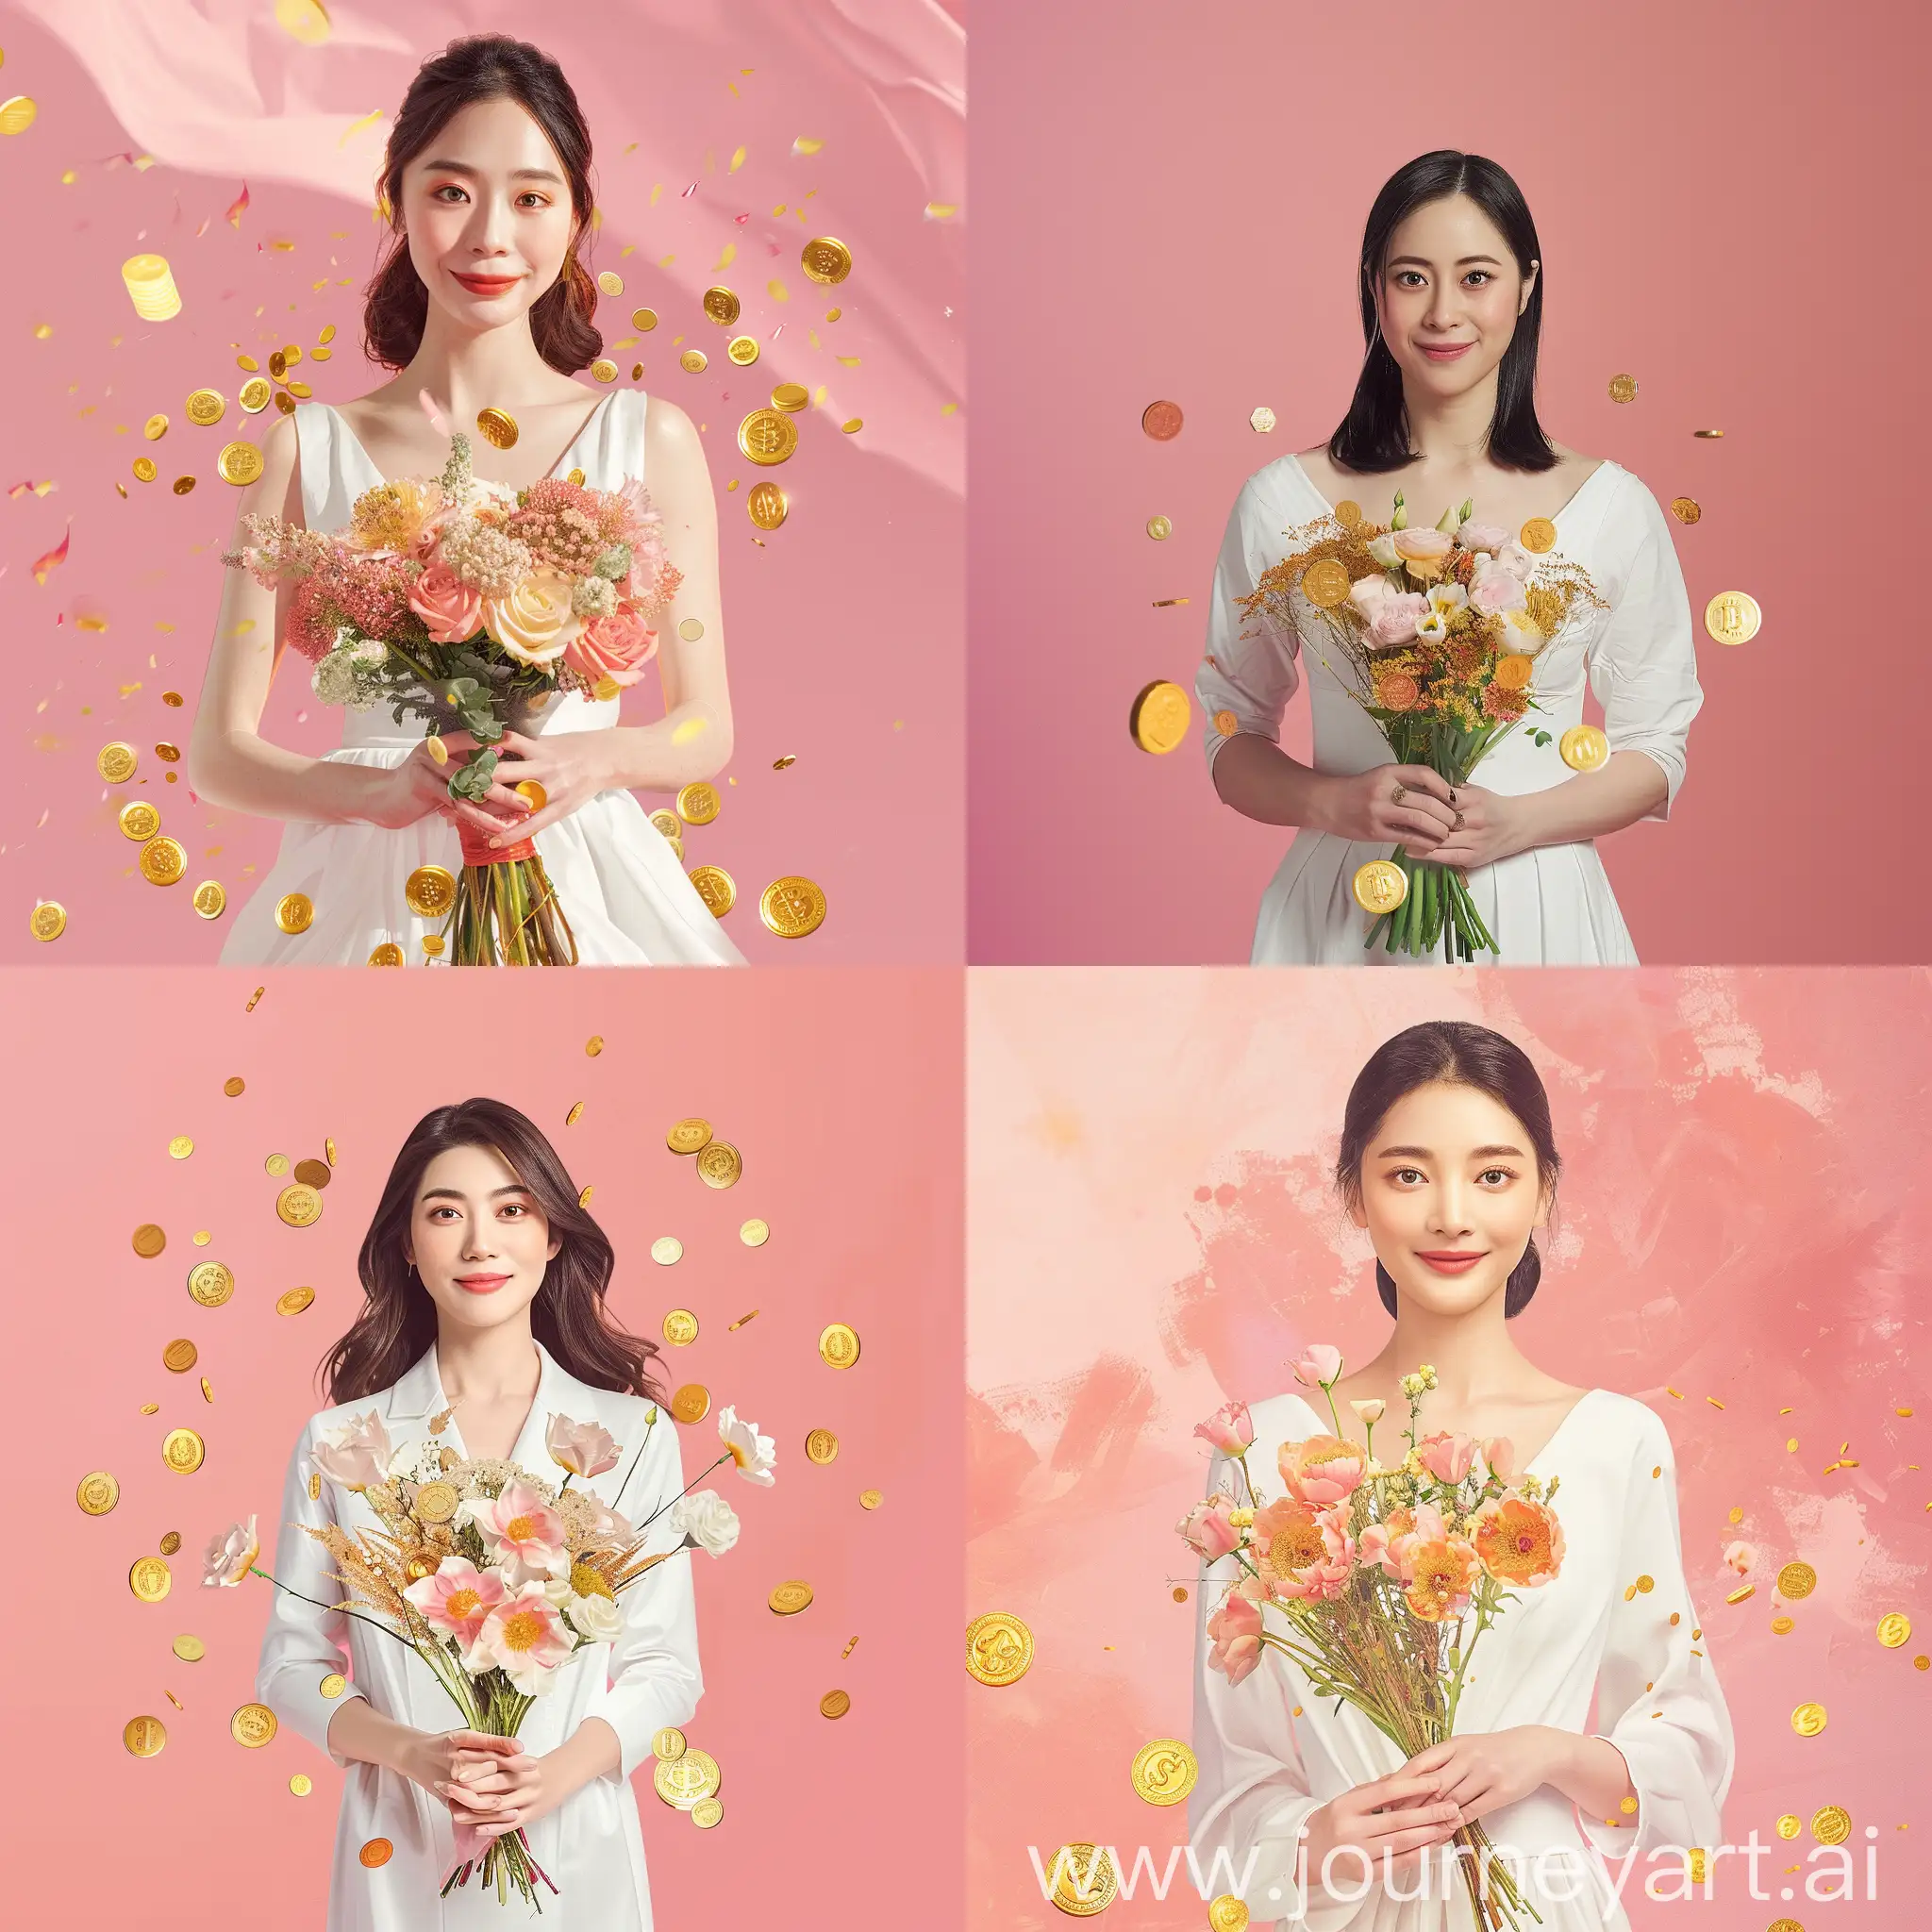 A Asian warm woman in a white dress，open eyes，look straight ahead and smile，holding a bouquet of flowers with gold coins in them, gold coins scattered around them, full-body shot，on a pink background, hand-painted illustration style